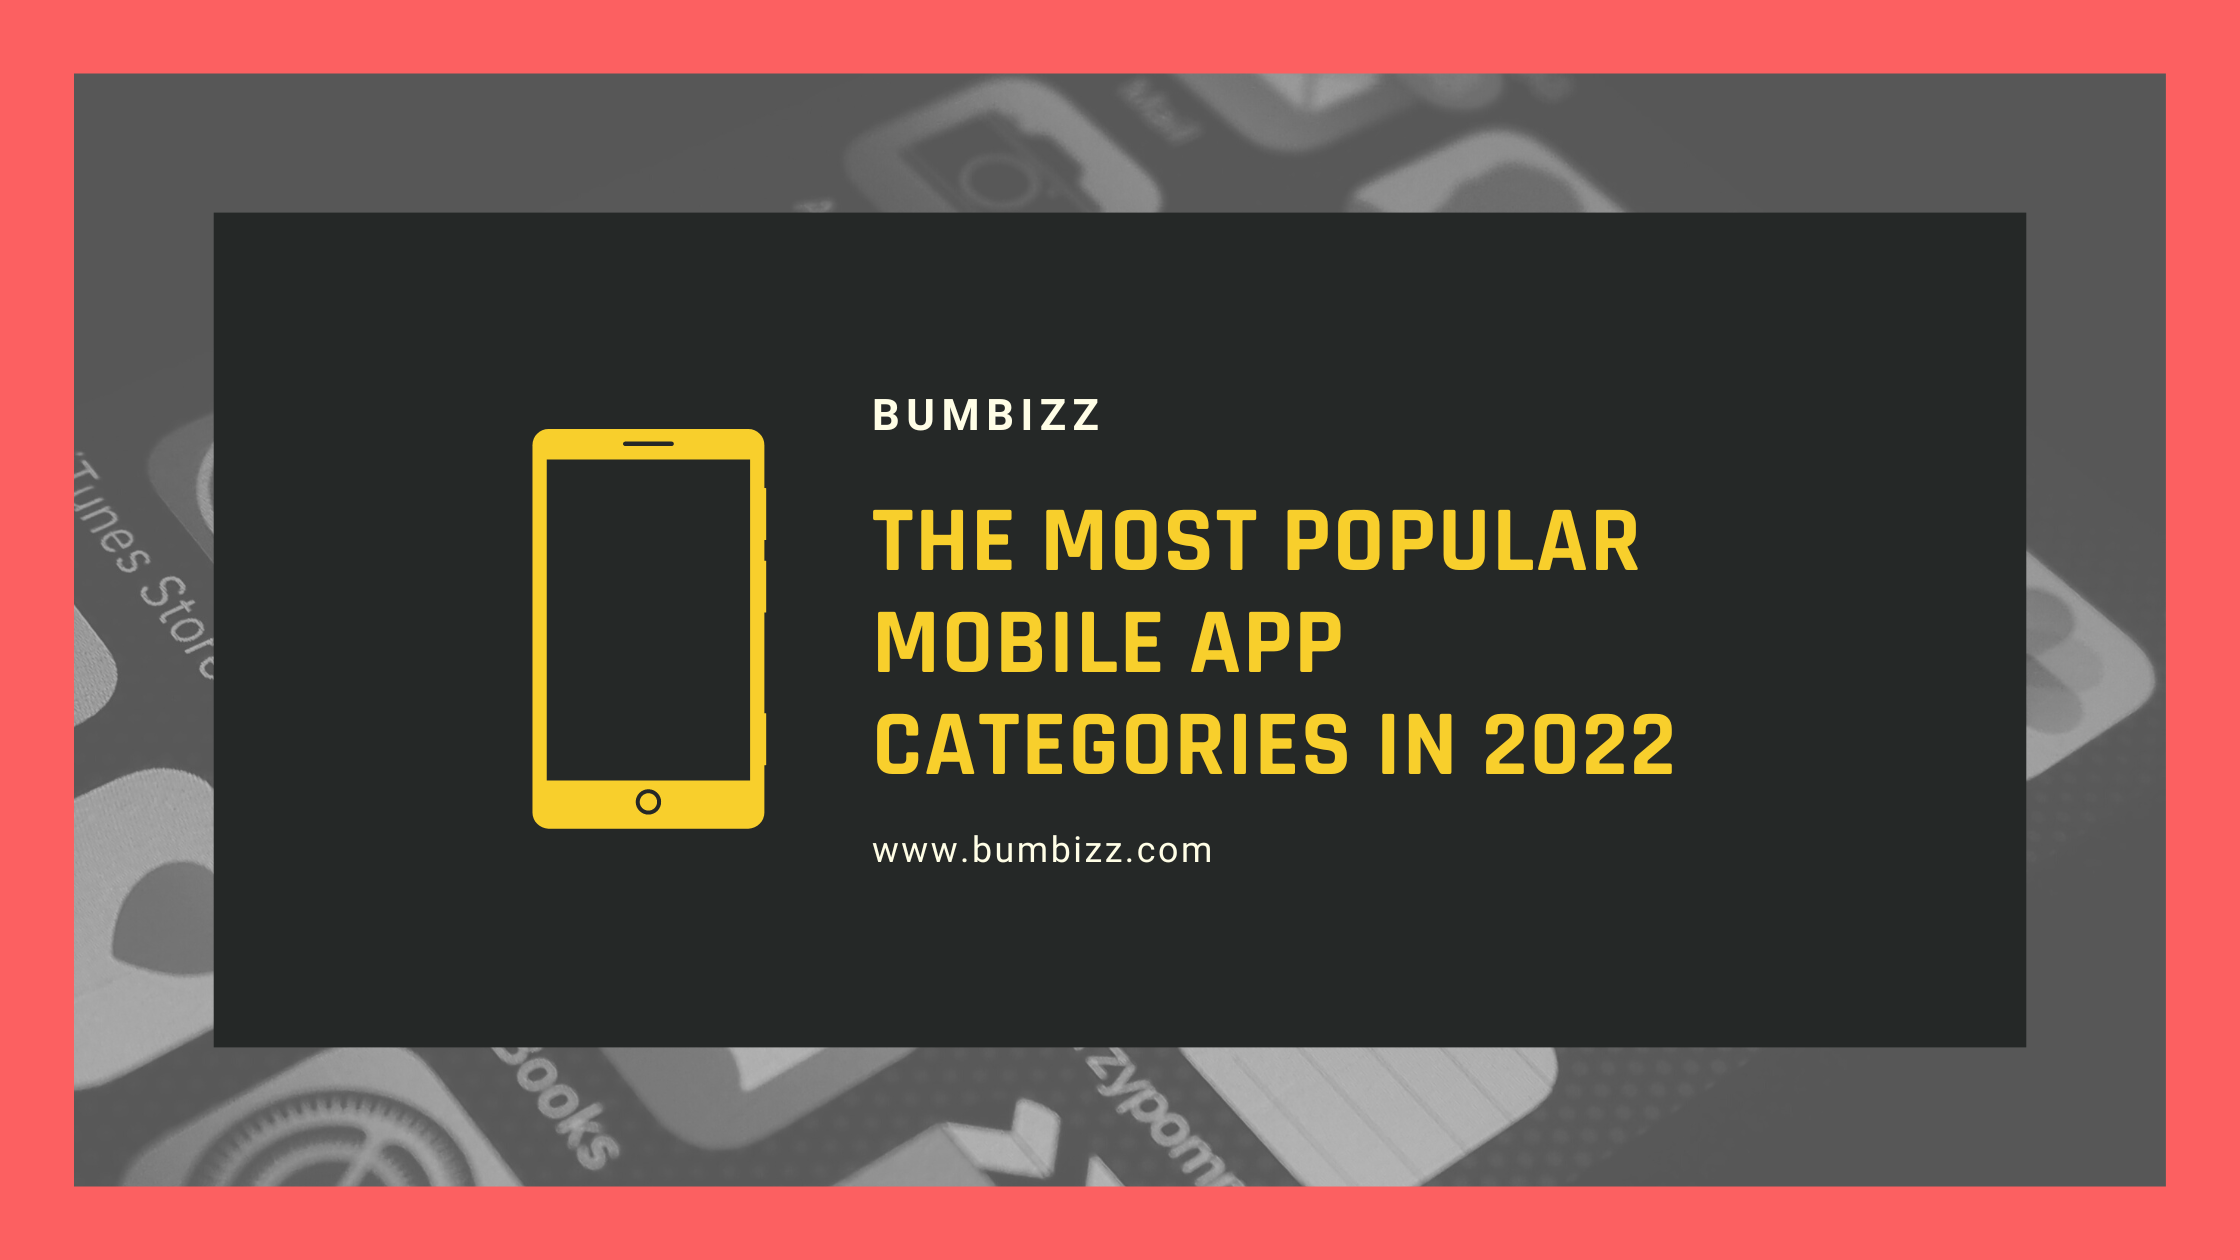 The most popular mobile app categories in 2022